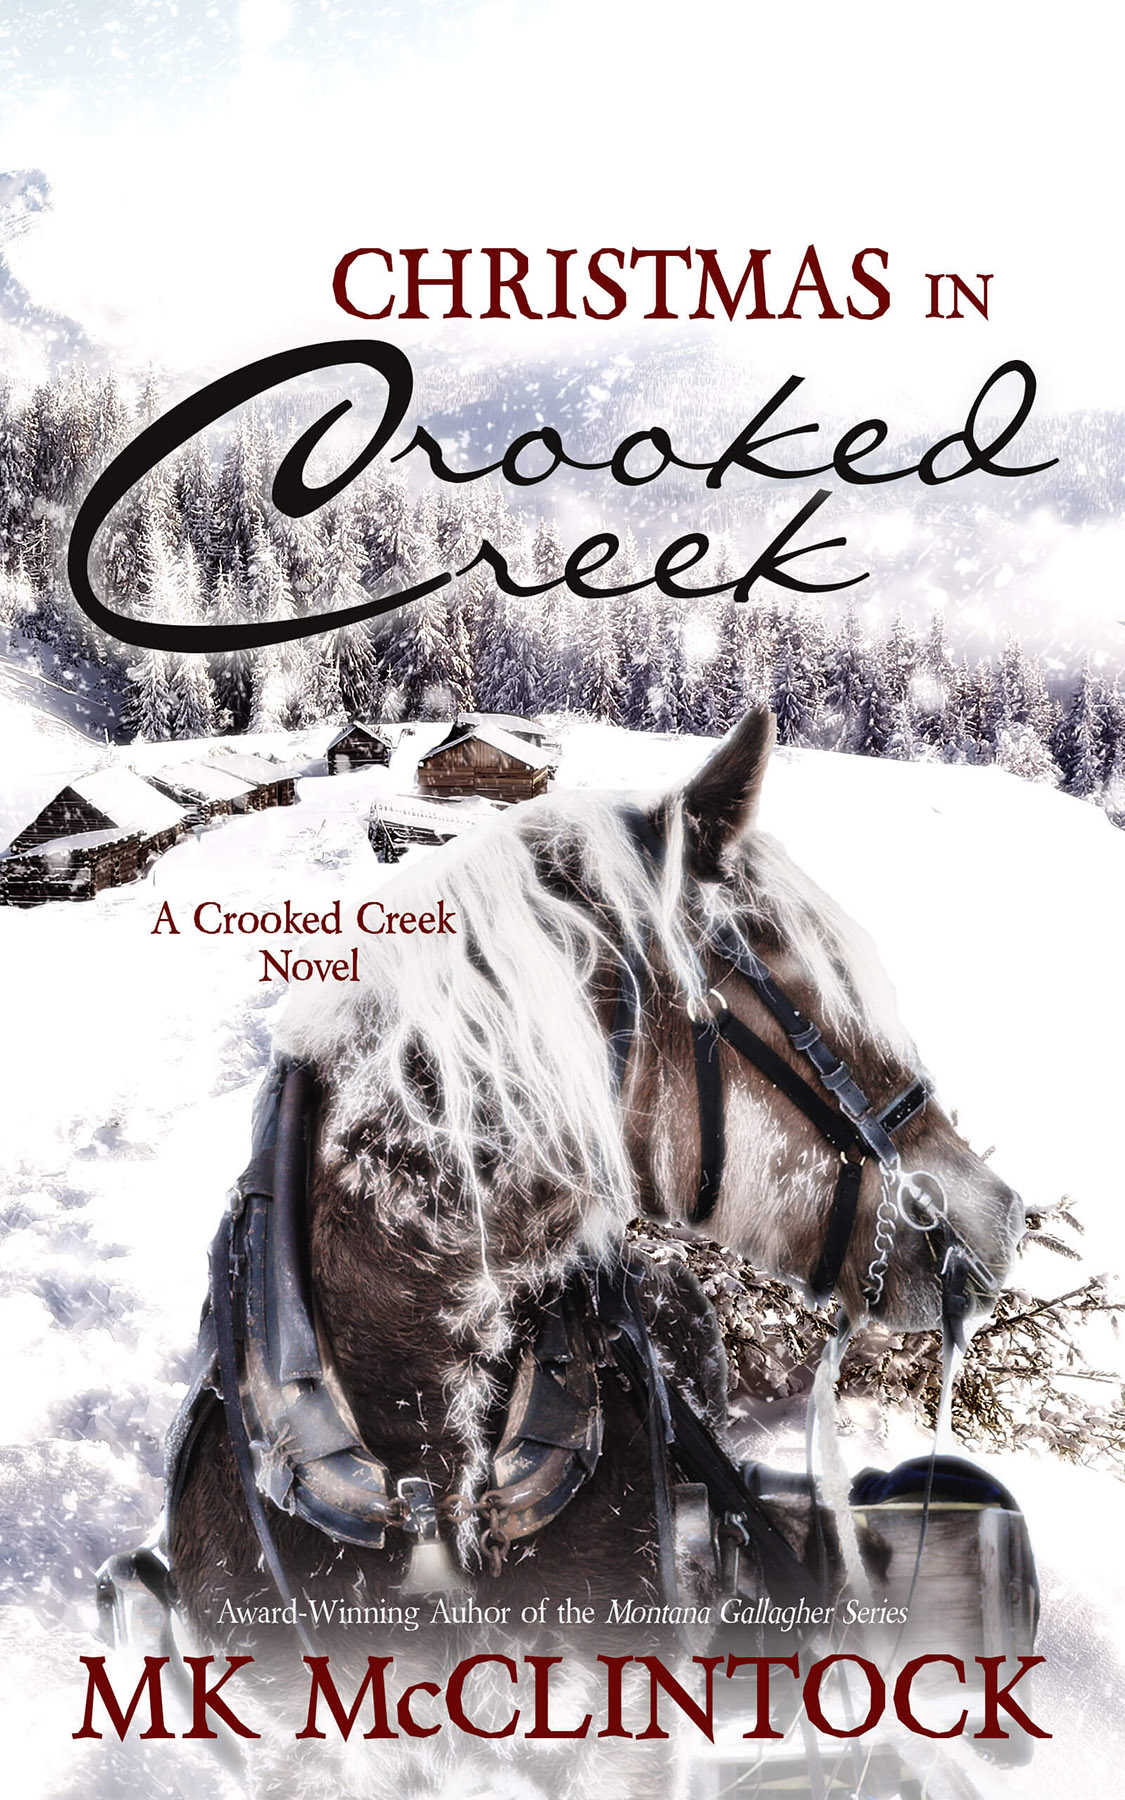 Christmas in Crooked, a historical western romance novel by MK McClintock